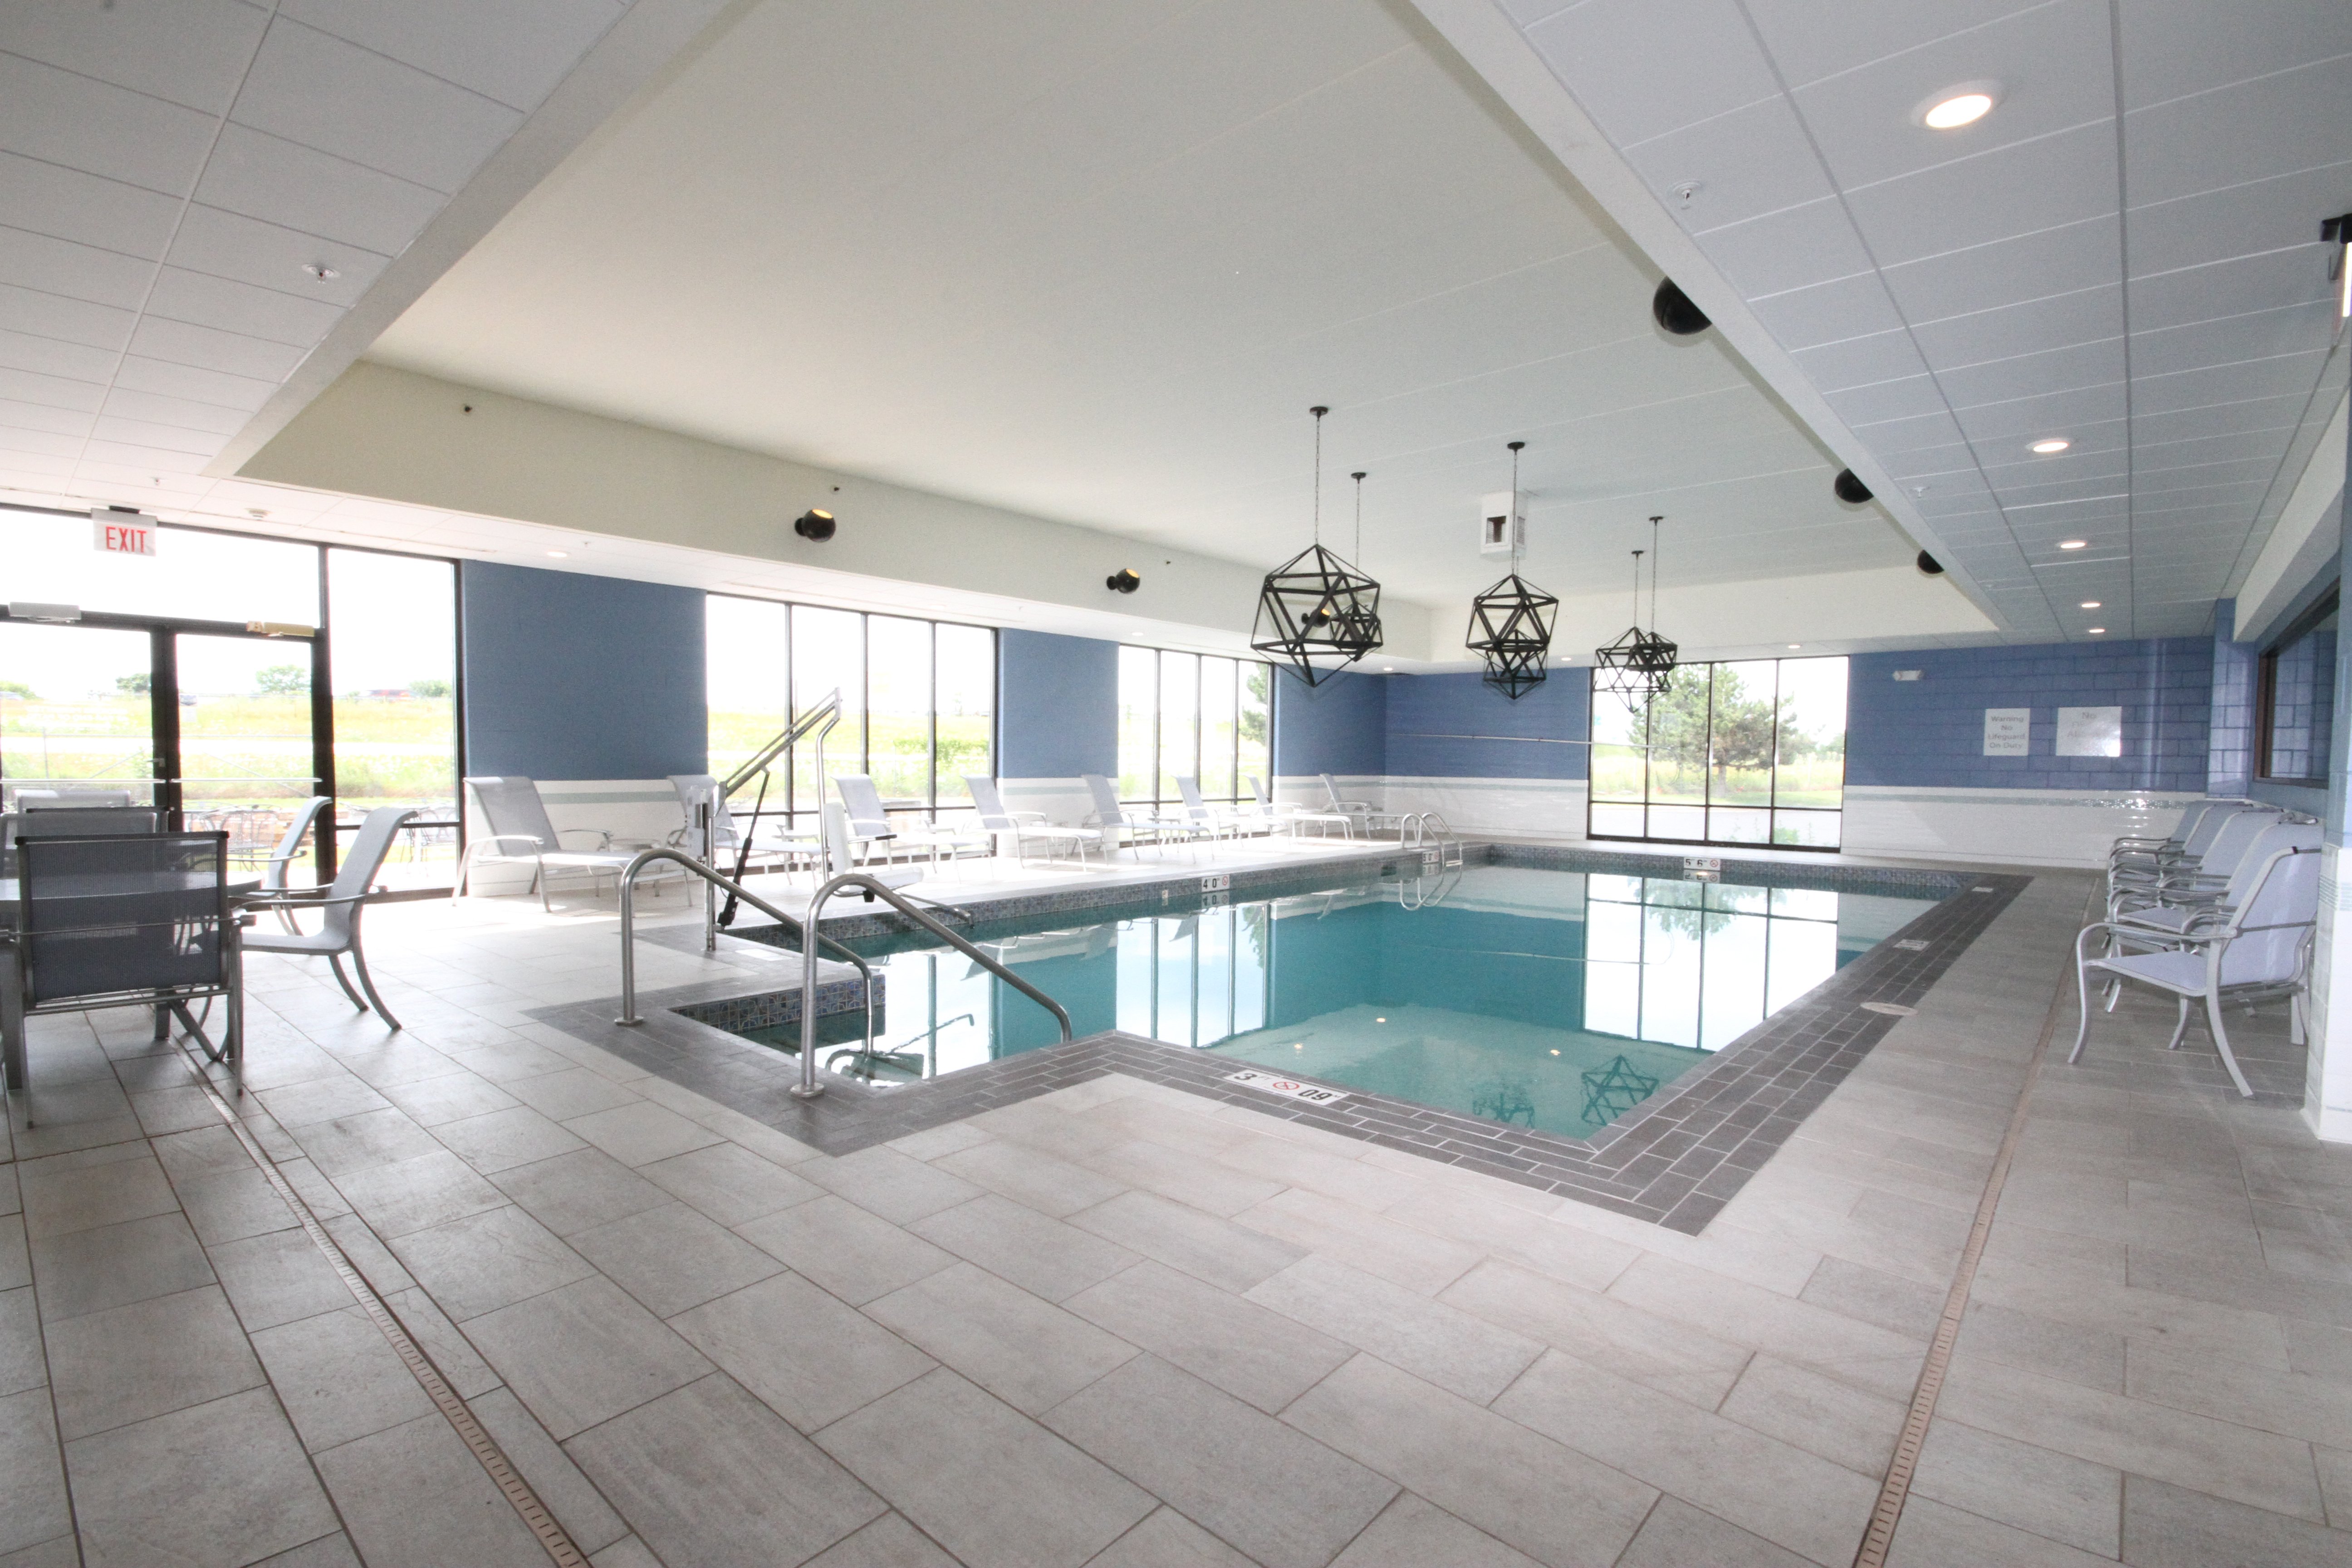 Janesville hotel with indoor pool - perfect for family fun!